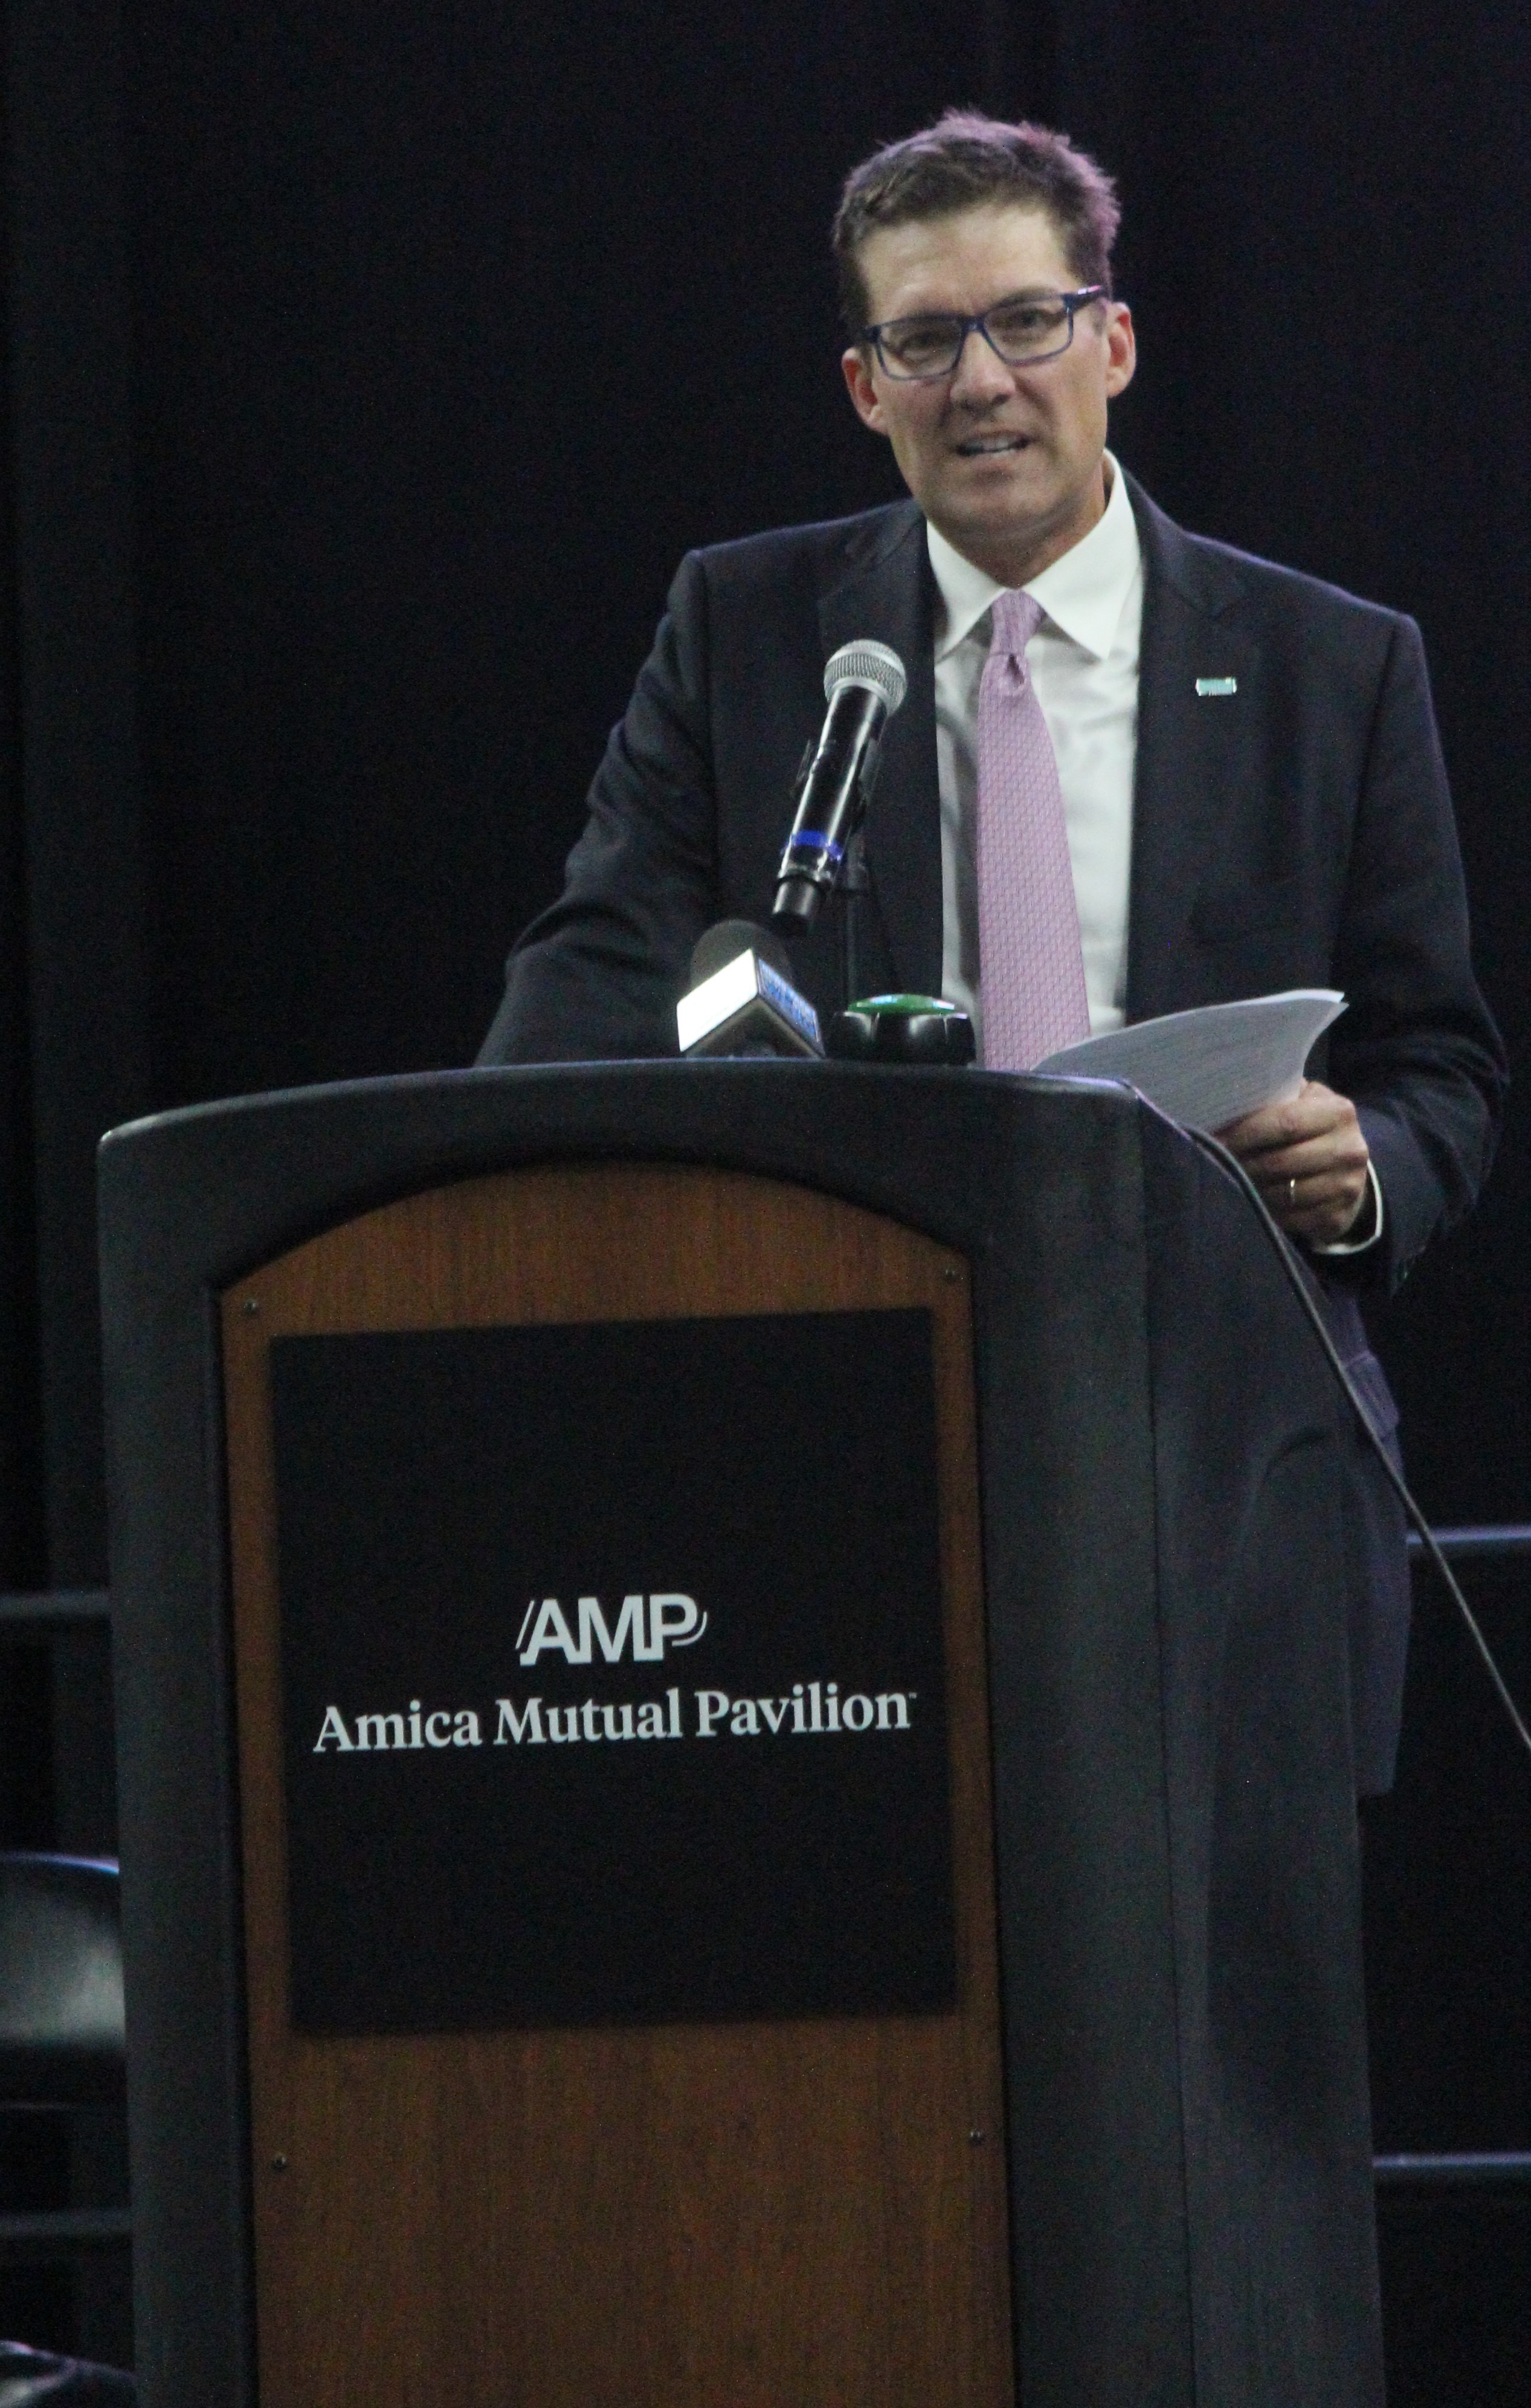 EDMUND 'TED' SHALLCROSS, Amica Mutual Insurance Co.'s incoming CEO and president, addresses the crowd Wednesday inside the newly named Amica Mutual Pavilion in Providence. / PBN PHOTO/JAMES BESSETTE